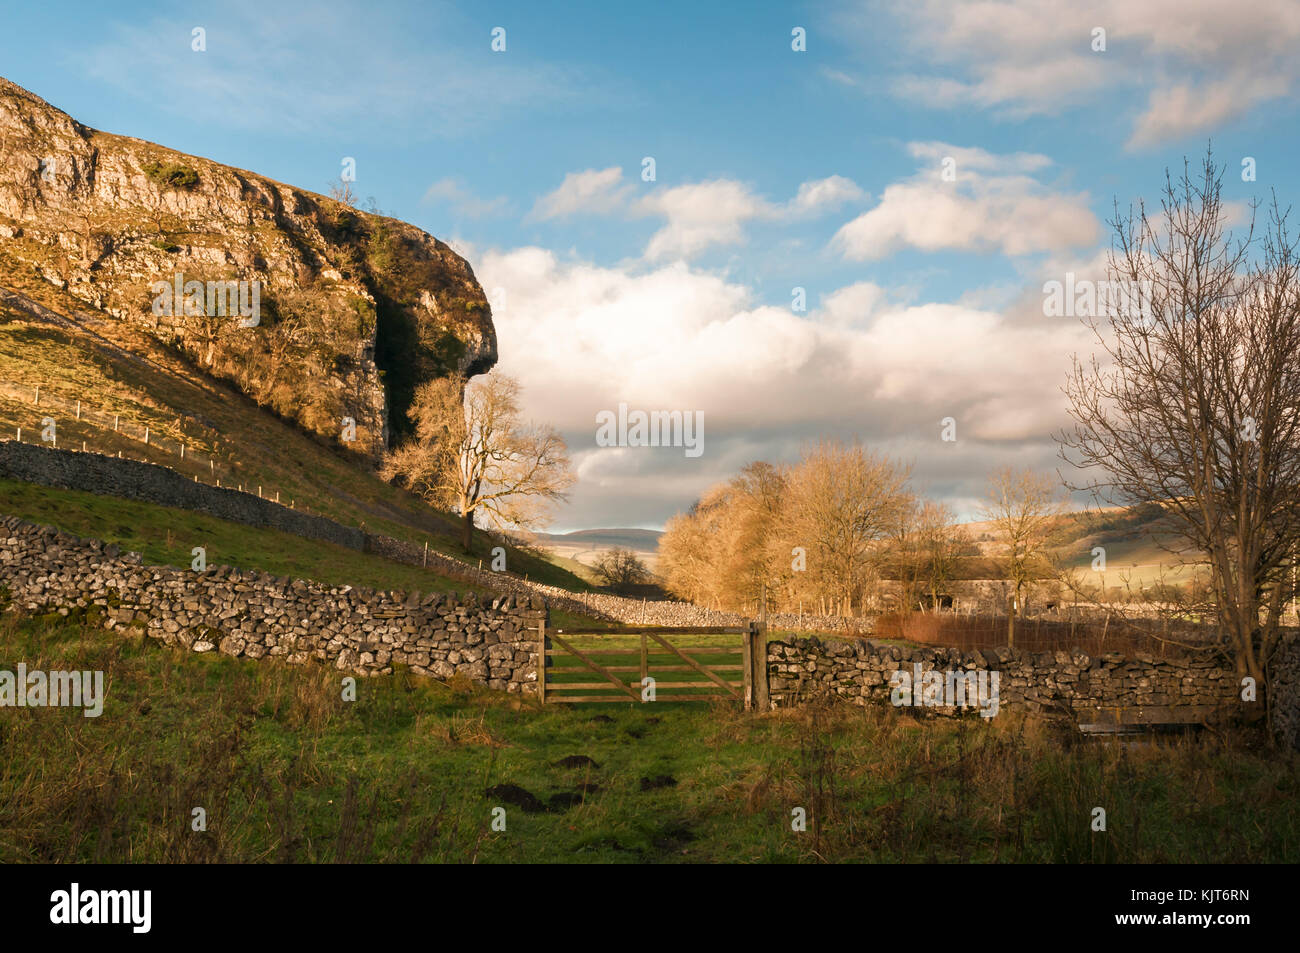 The 40 ft overhang of the 180 ft Kilnsey Crag in Upper Wharfedale, Yorkshire Dales village of Kilnsey, England. 24 November 2017 Stock Photo